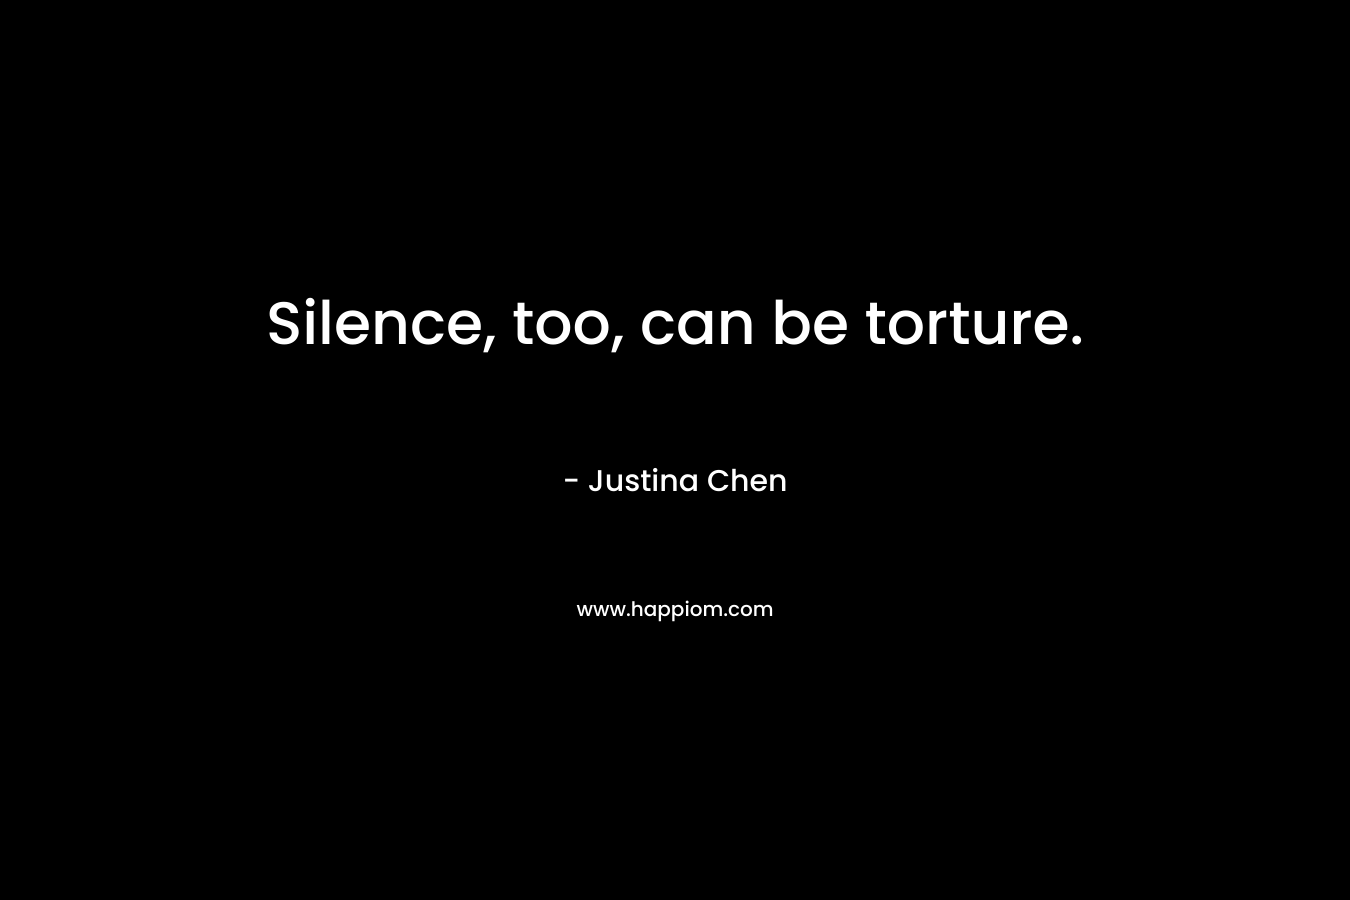 Silence, too, can be torture. – Justina Chen